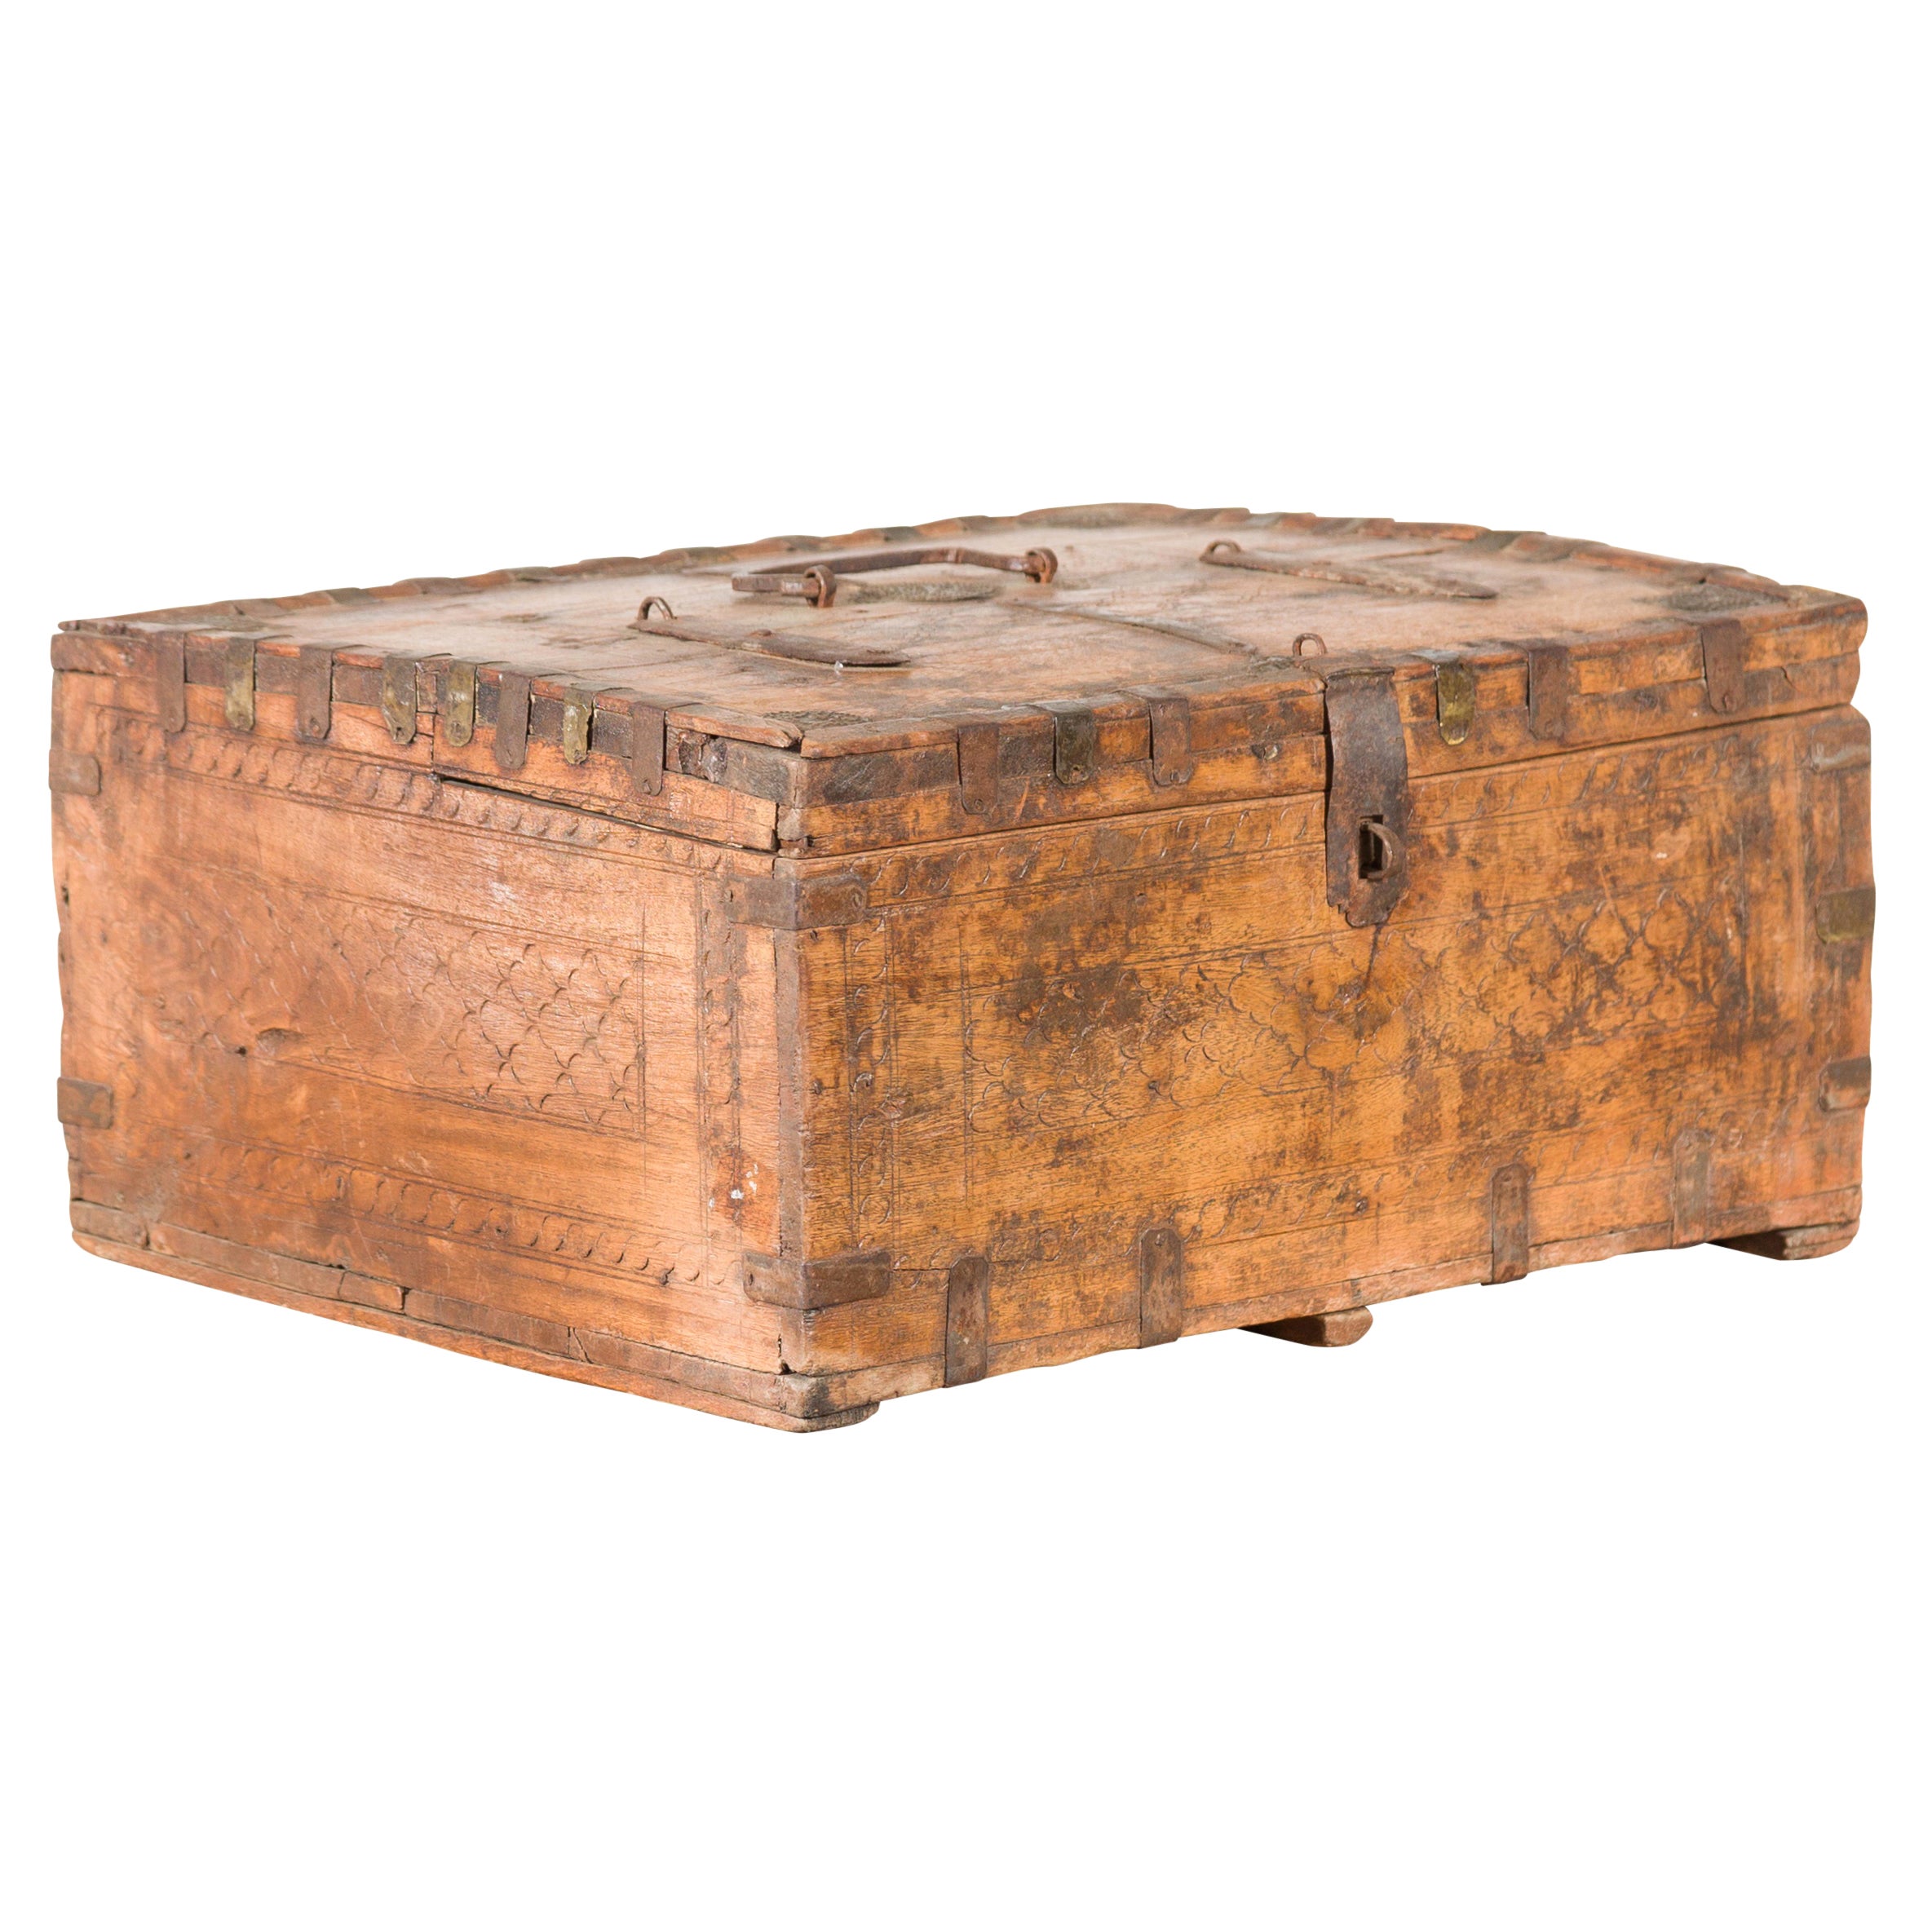 Rustic Indian 19th Century Compartmented Box with Iron Details and Carved Motifs